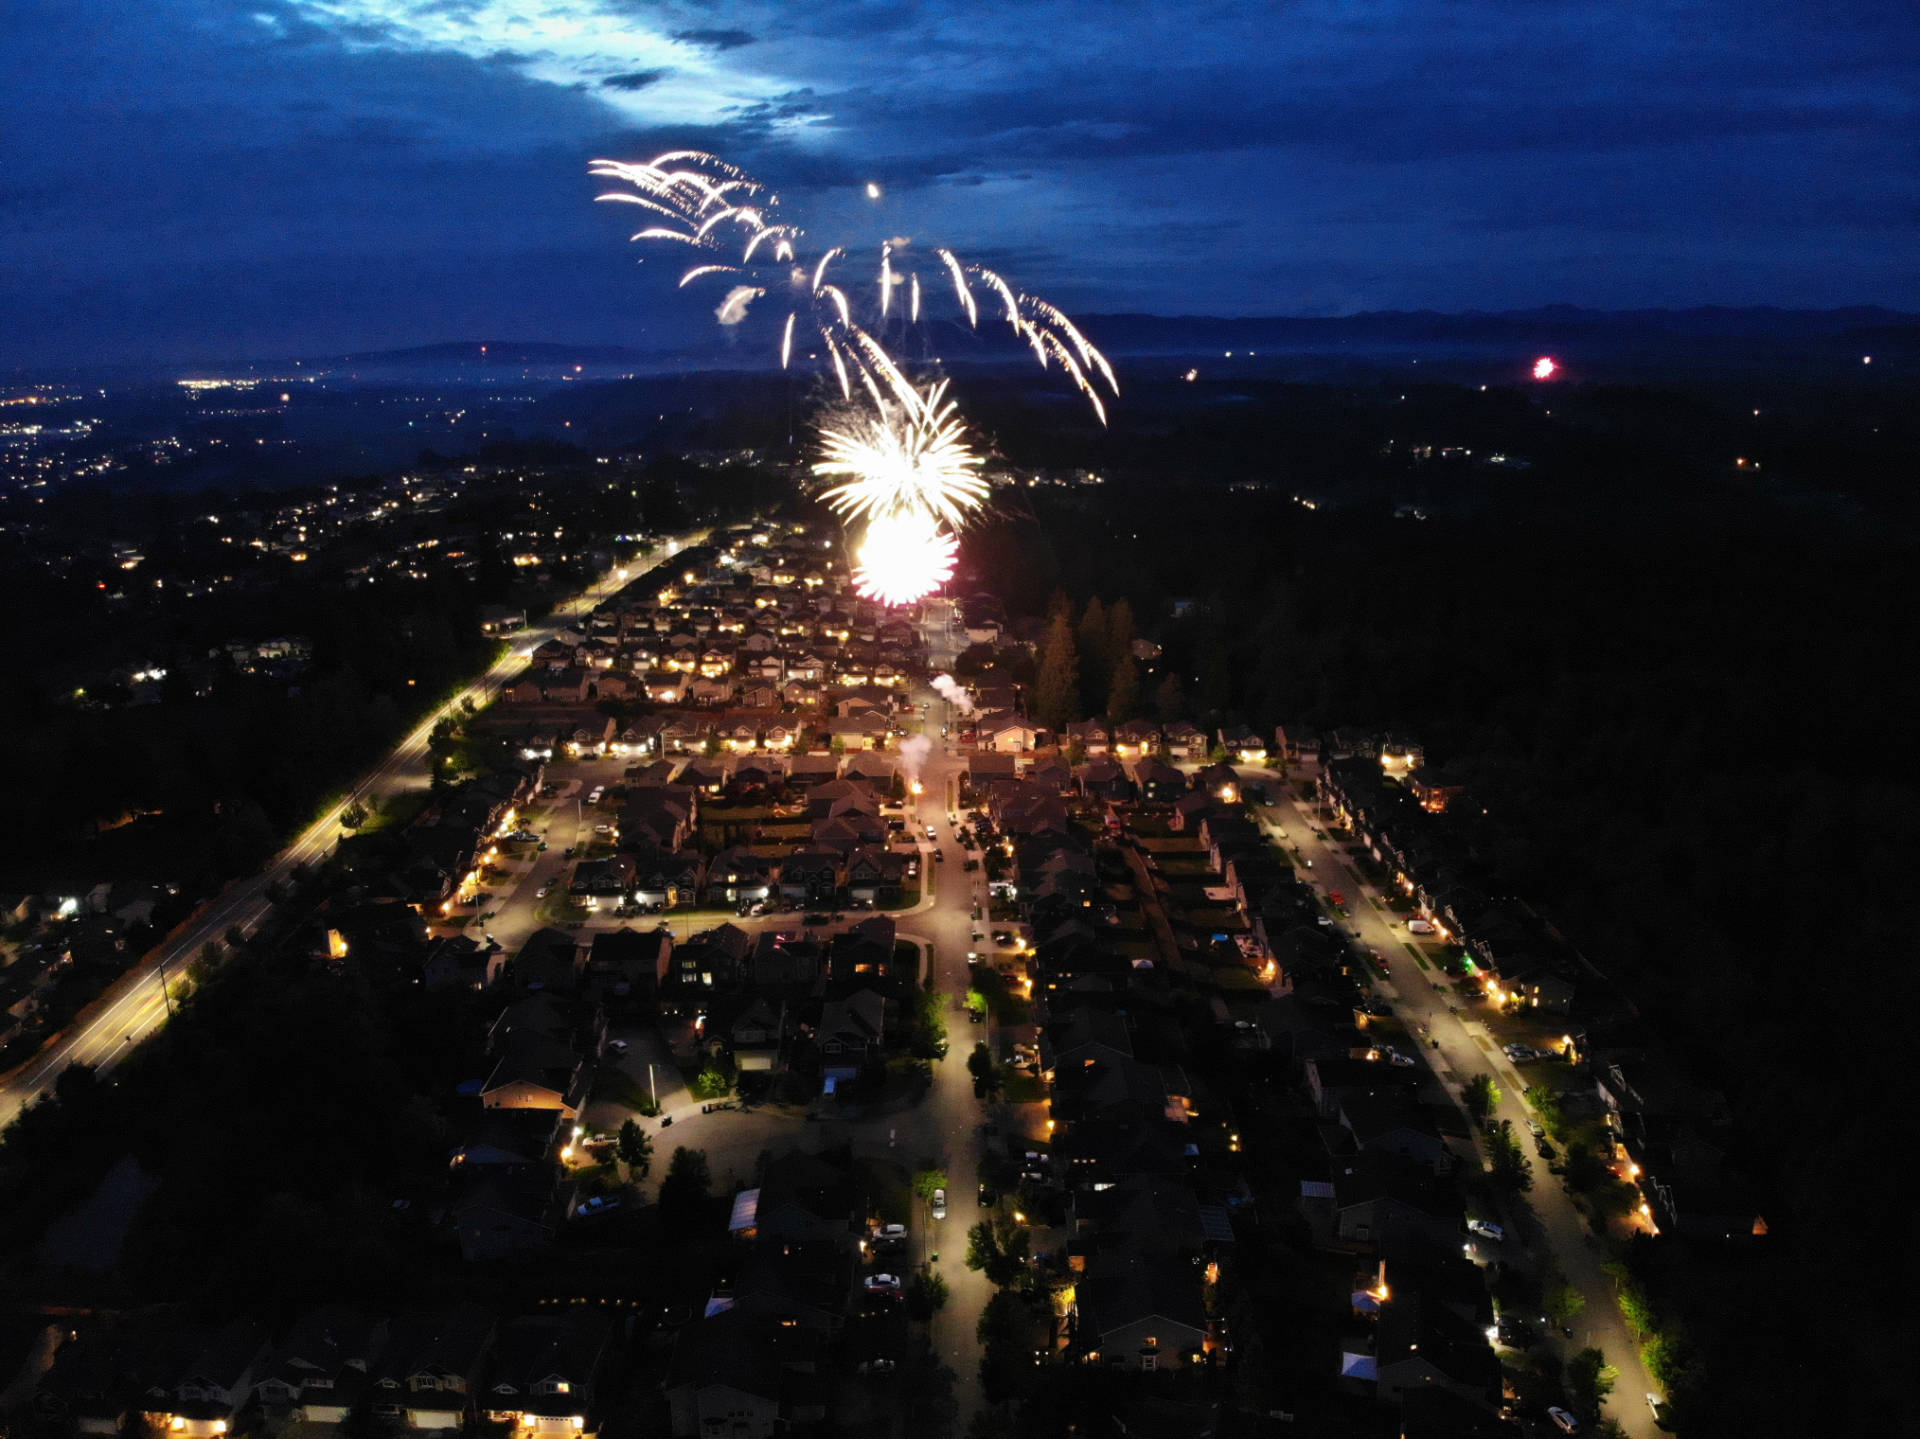 Some fireworks were still going off over Marysville Wednesday night on July 4 despite the city’s second year of a ban. (Courtesy Photo)